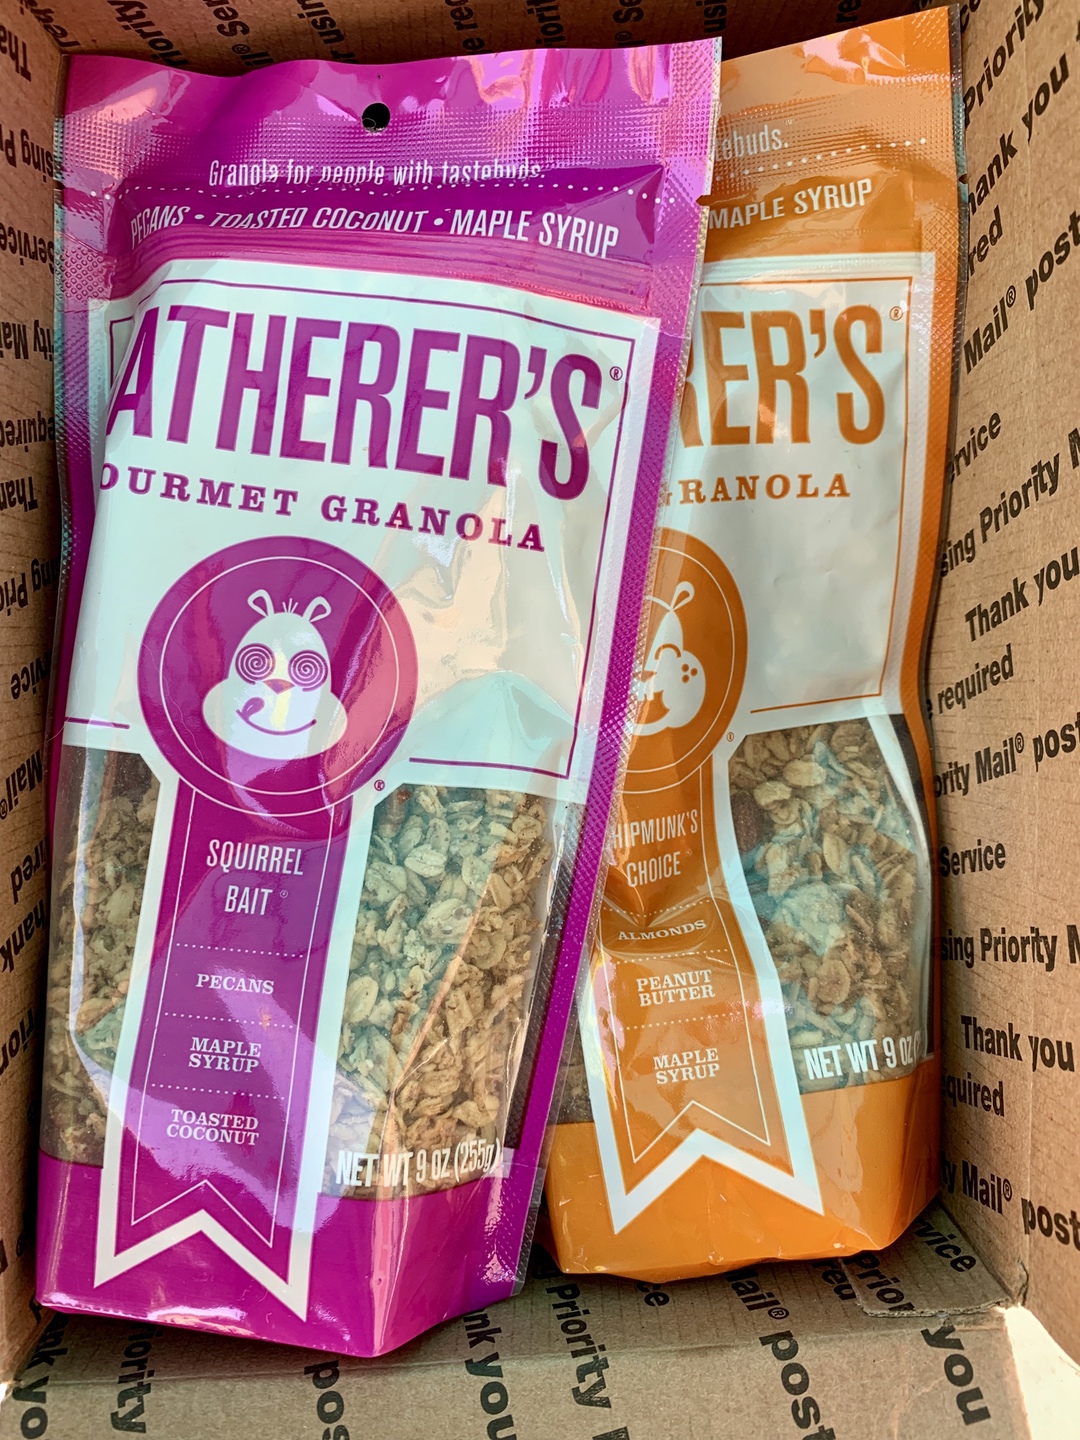 bags of granola in a box